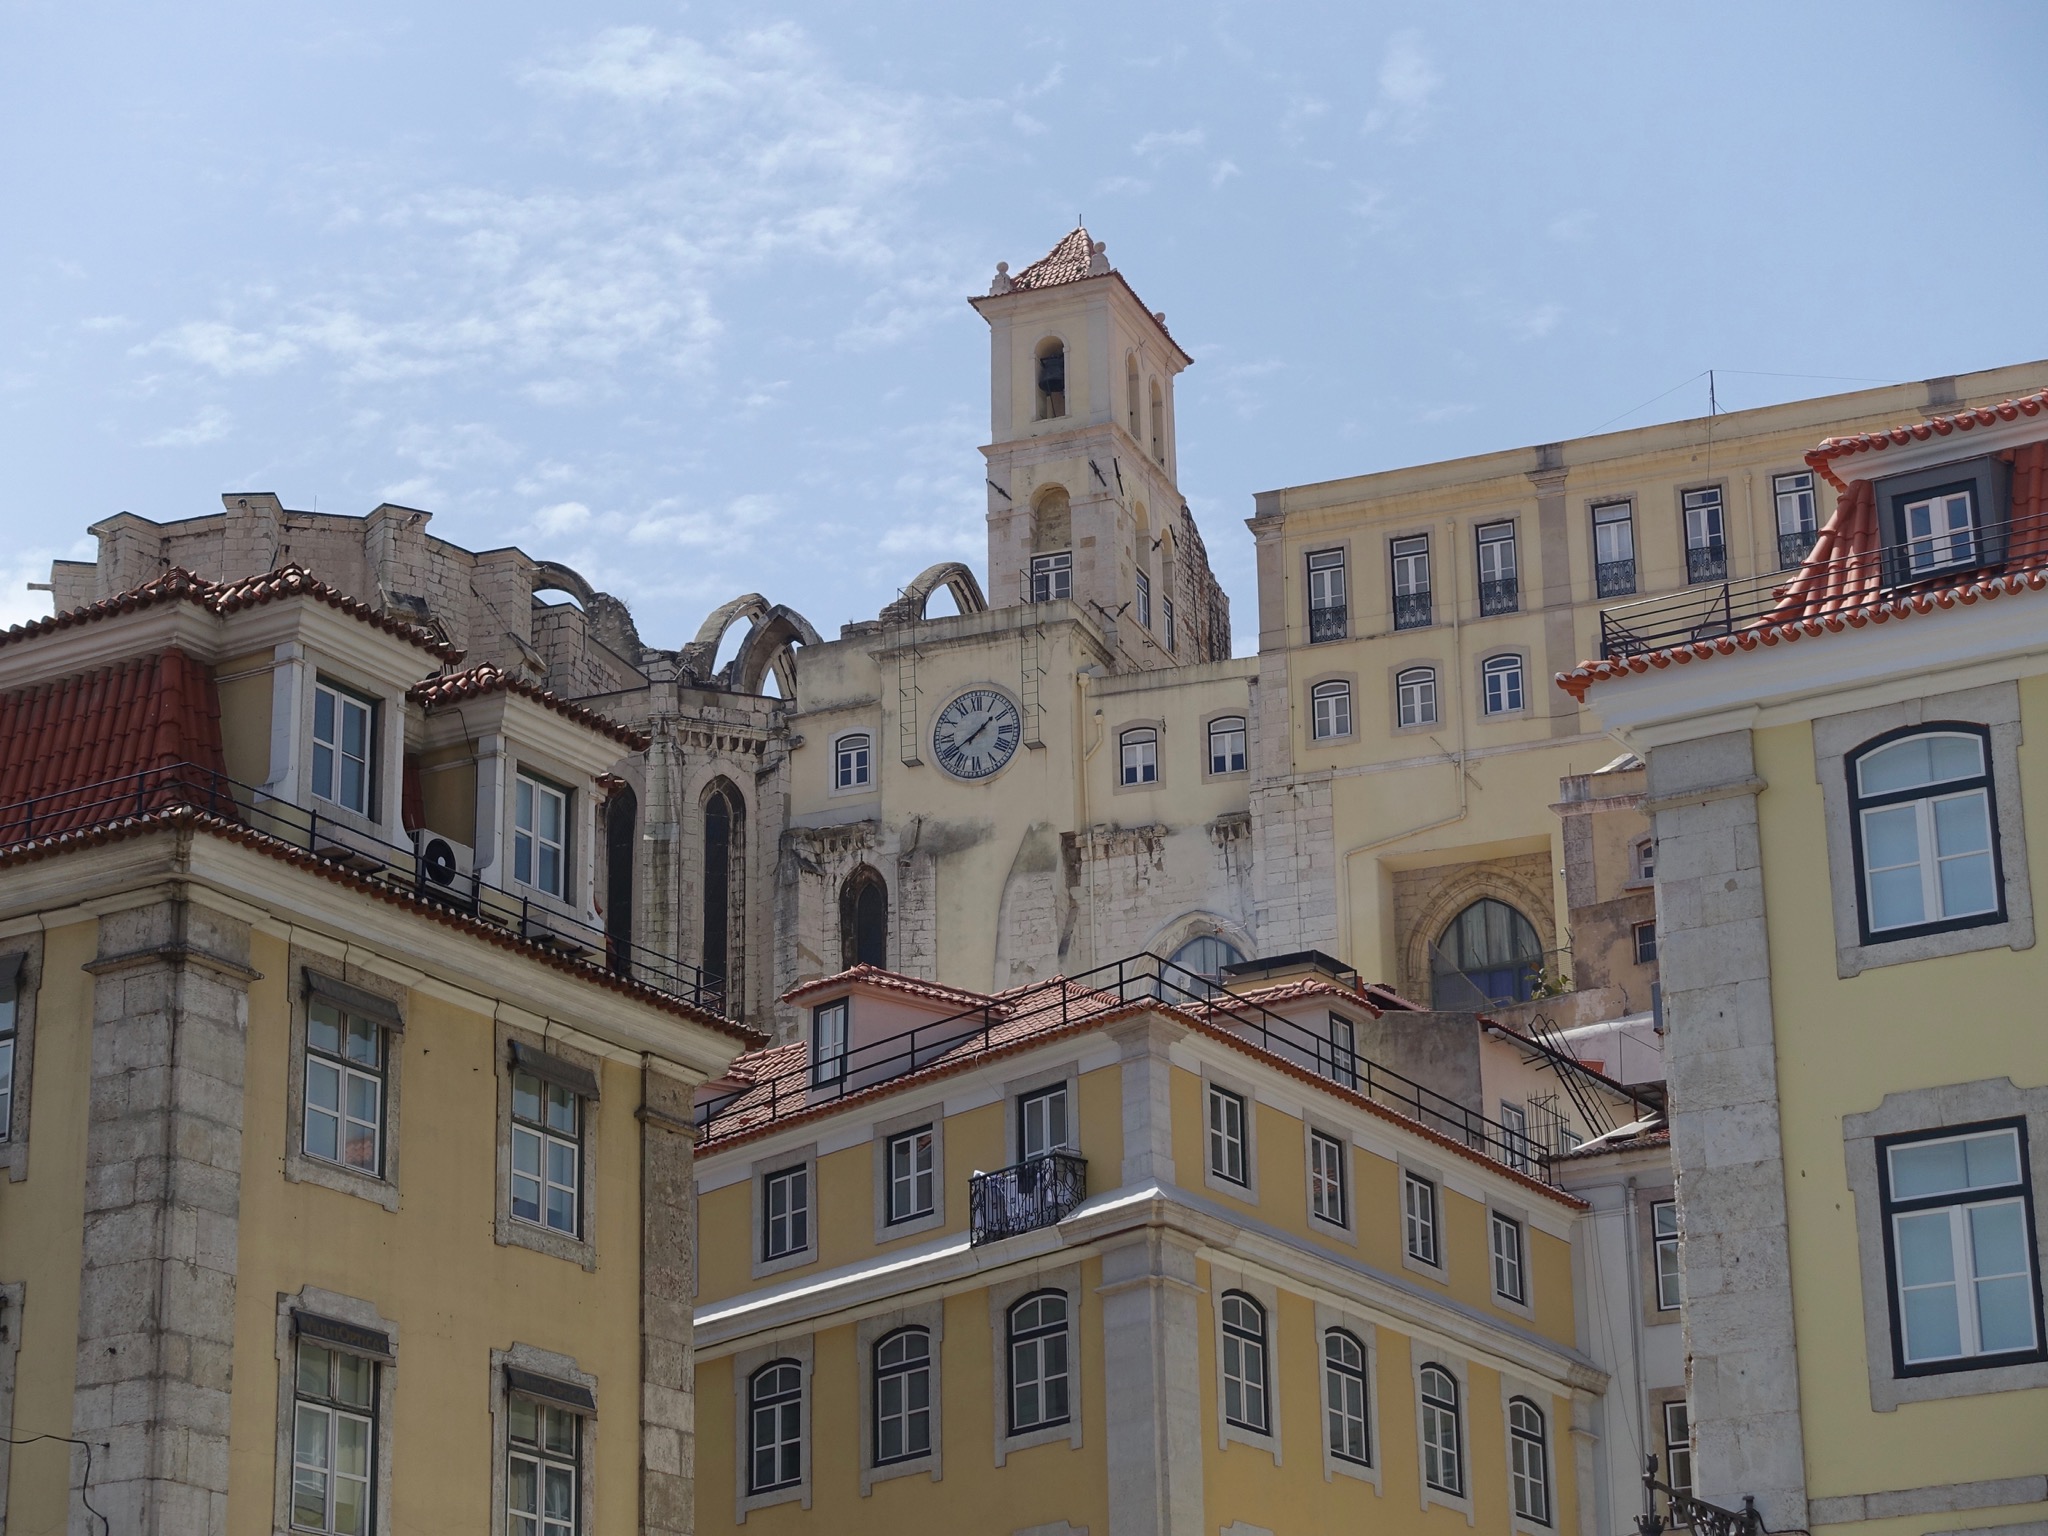 Photo 40 of 86 from the album Highlights Lisbon 2015.